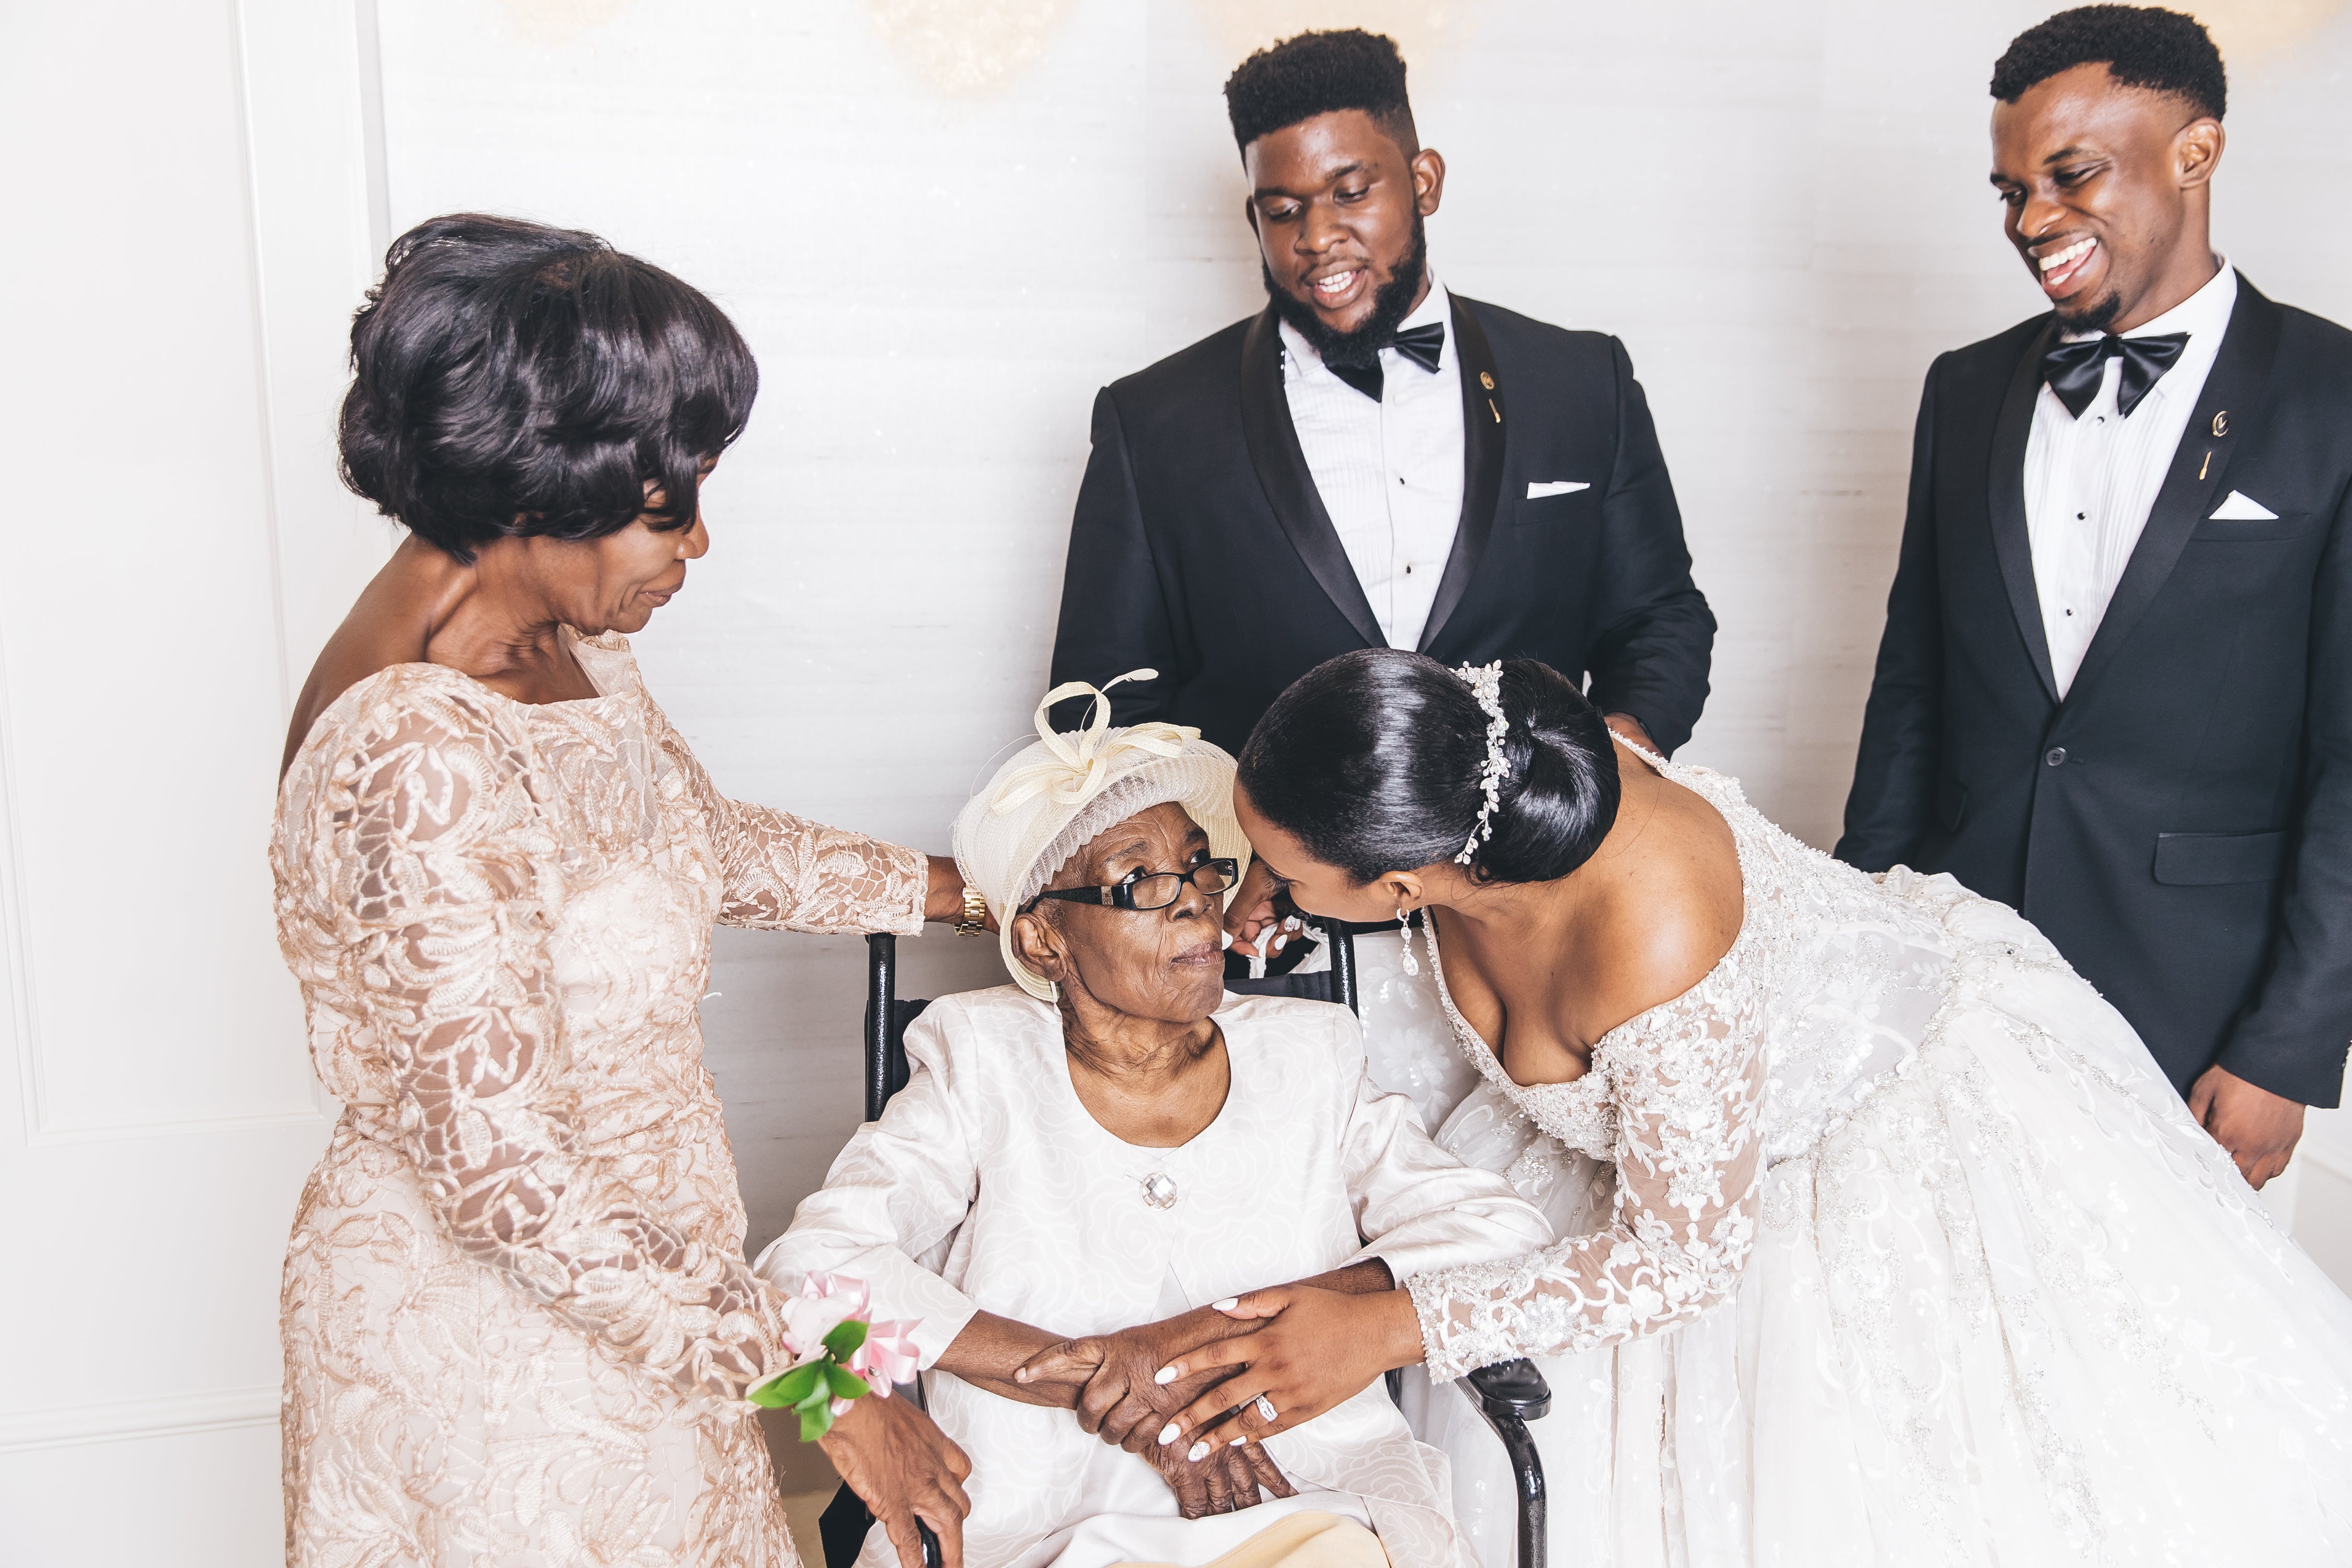 Bridal Bliss: Kareem and Sandy Shared Their Very First Kiss At The Altar